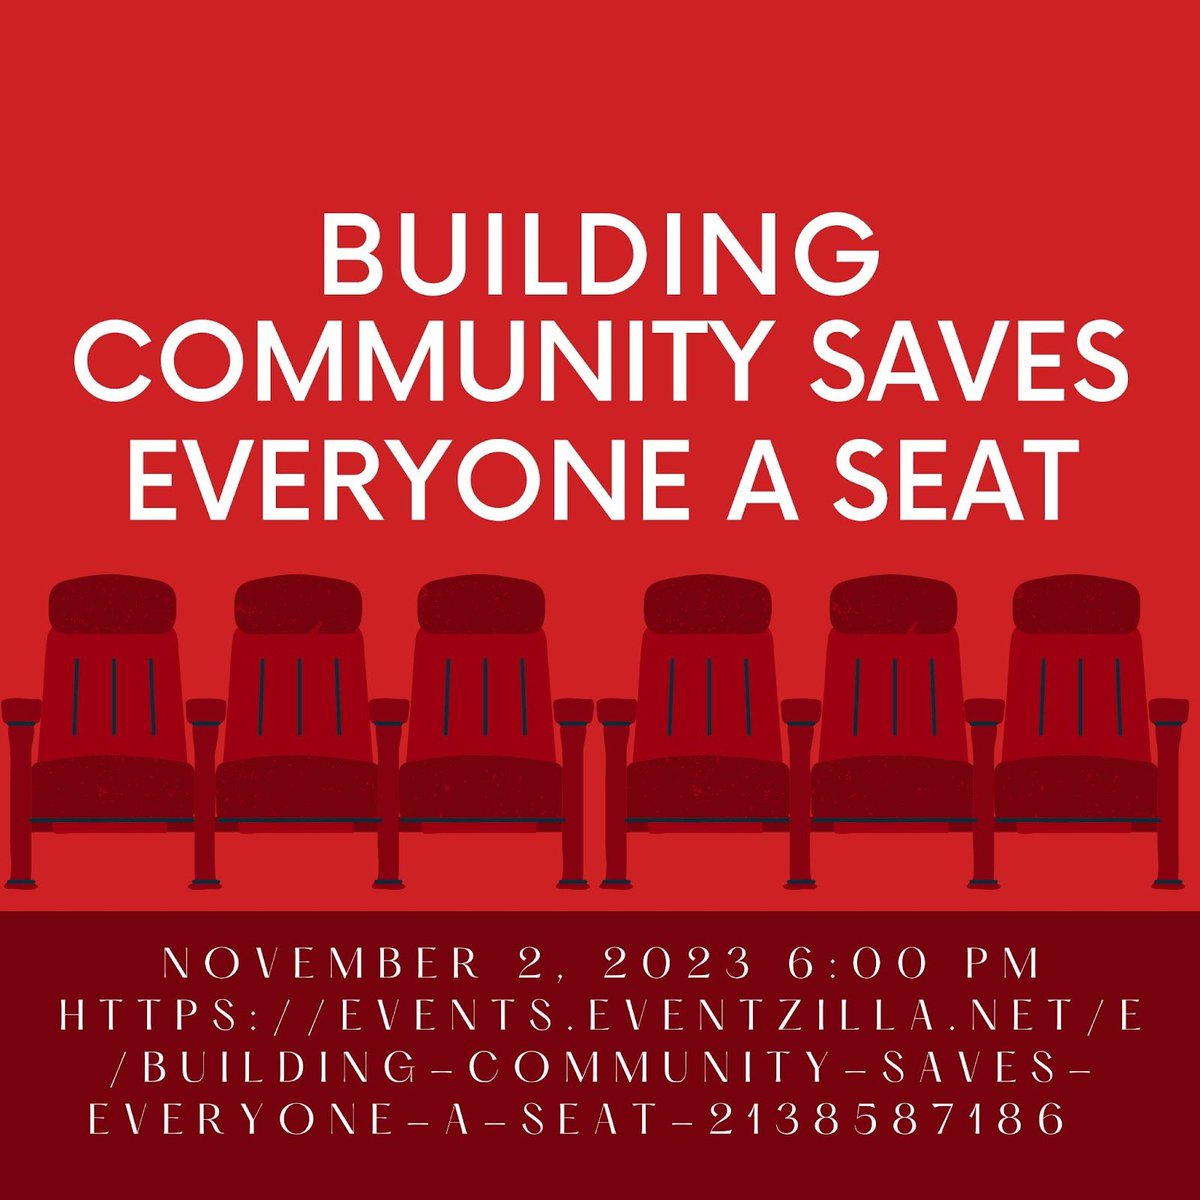 Building Community Saves Everyone a Seat 📕 Join us on 11/2/23 @ 6:00PM! Register here: events.eventzilla.net/e/building-com…